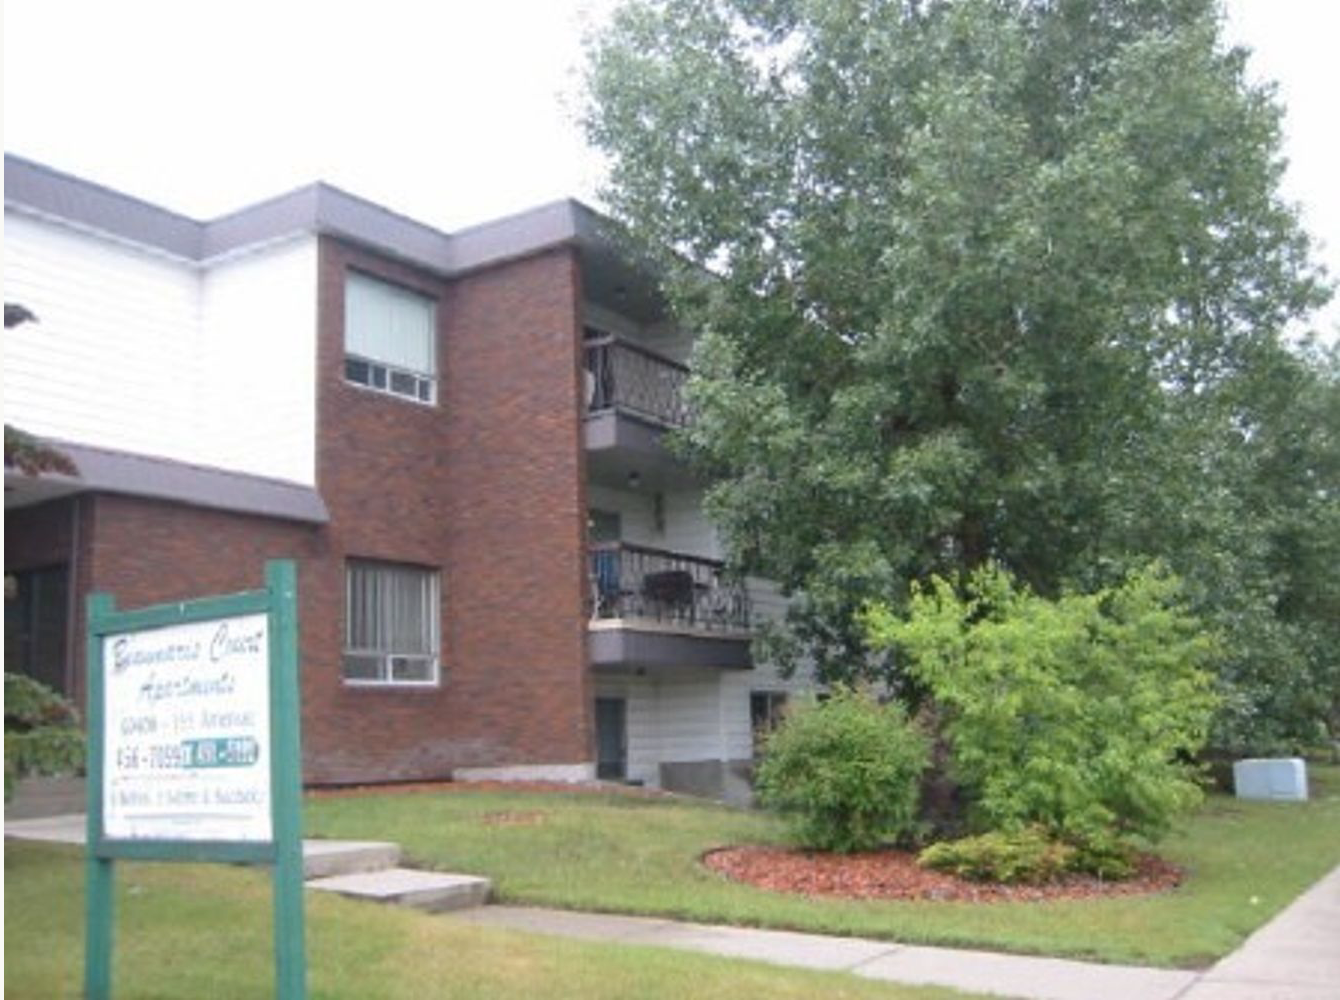 Main Photo: 10408 155TH Ave in Edmonton: Multifamily for sale